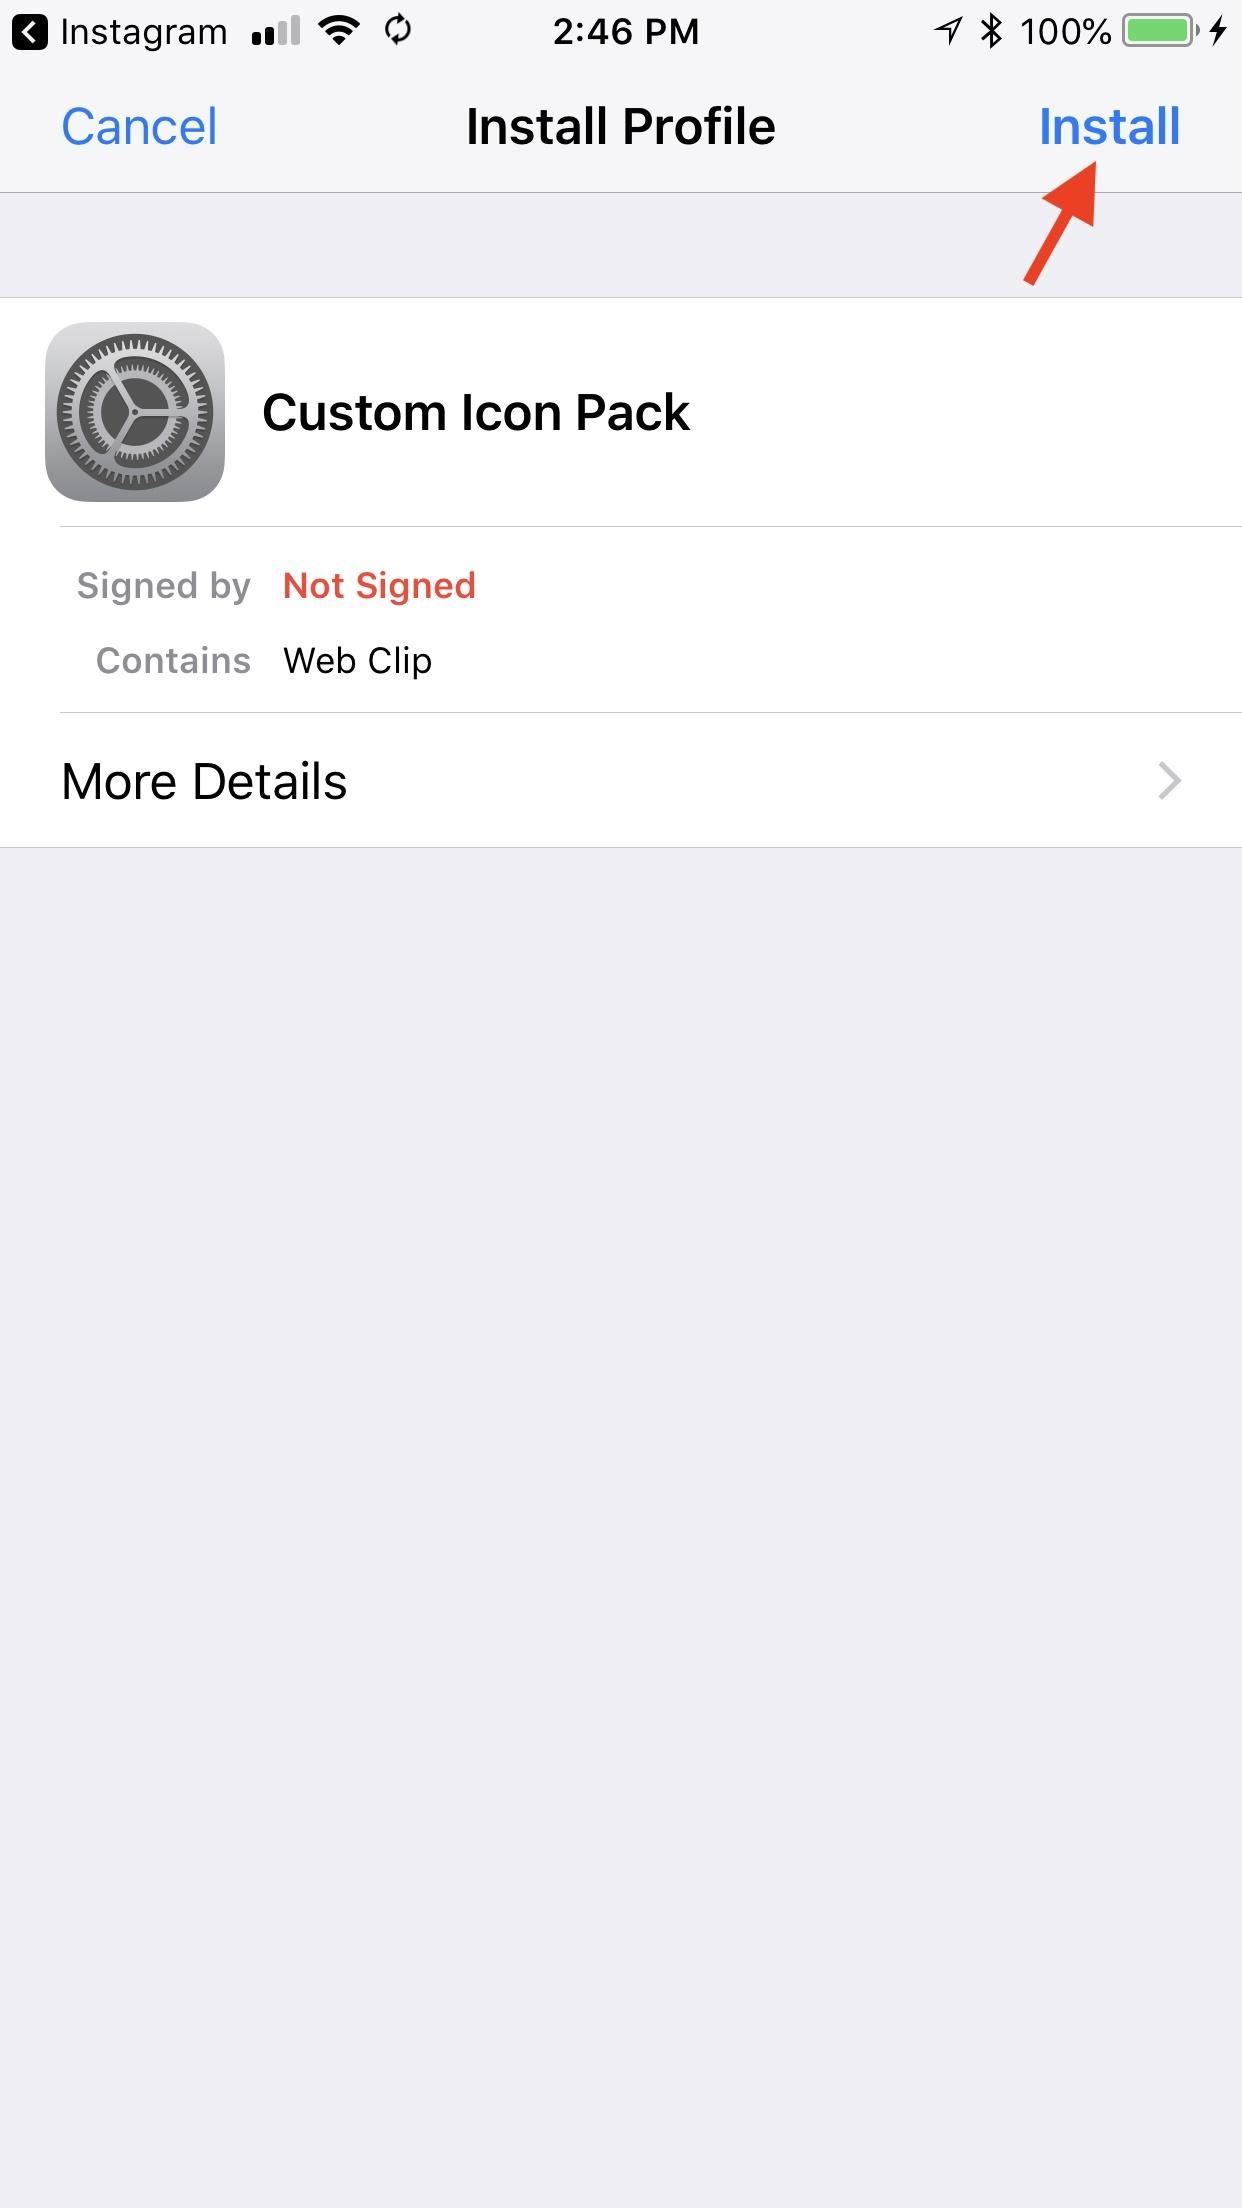 How to Customize iOS App Icons Without Jailbreaking Your iPhone